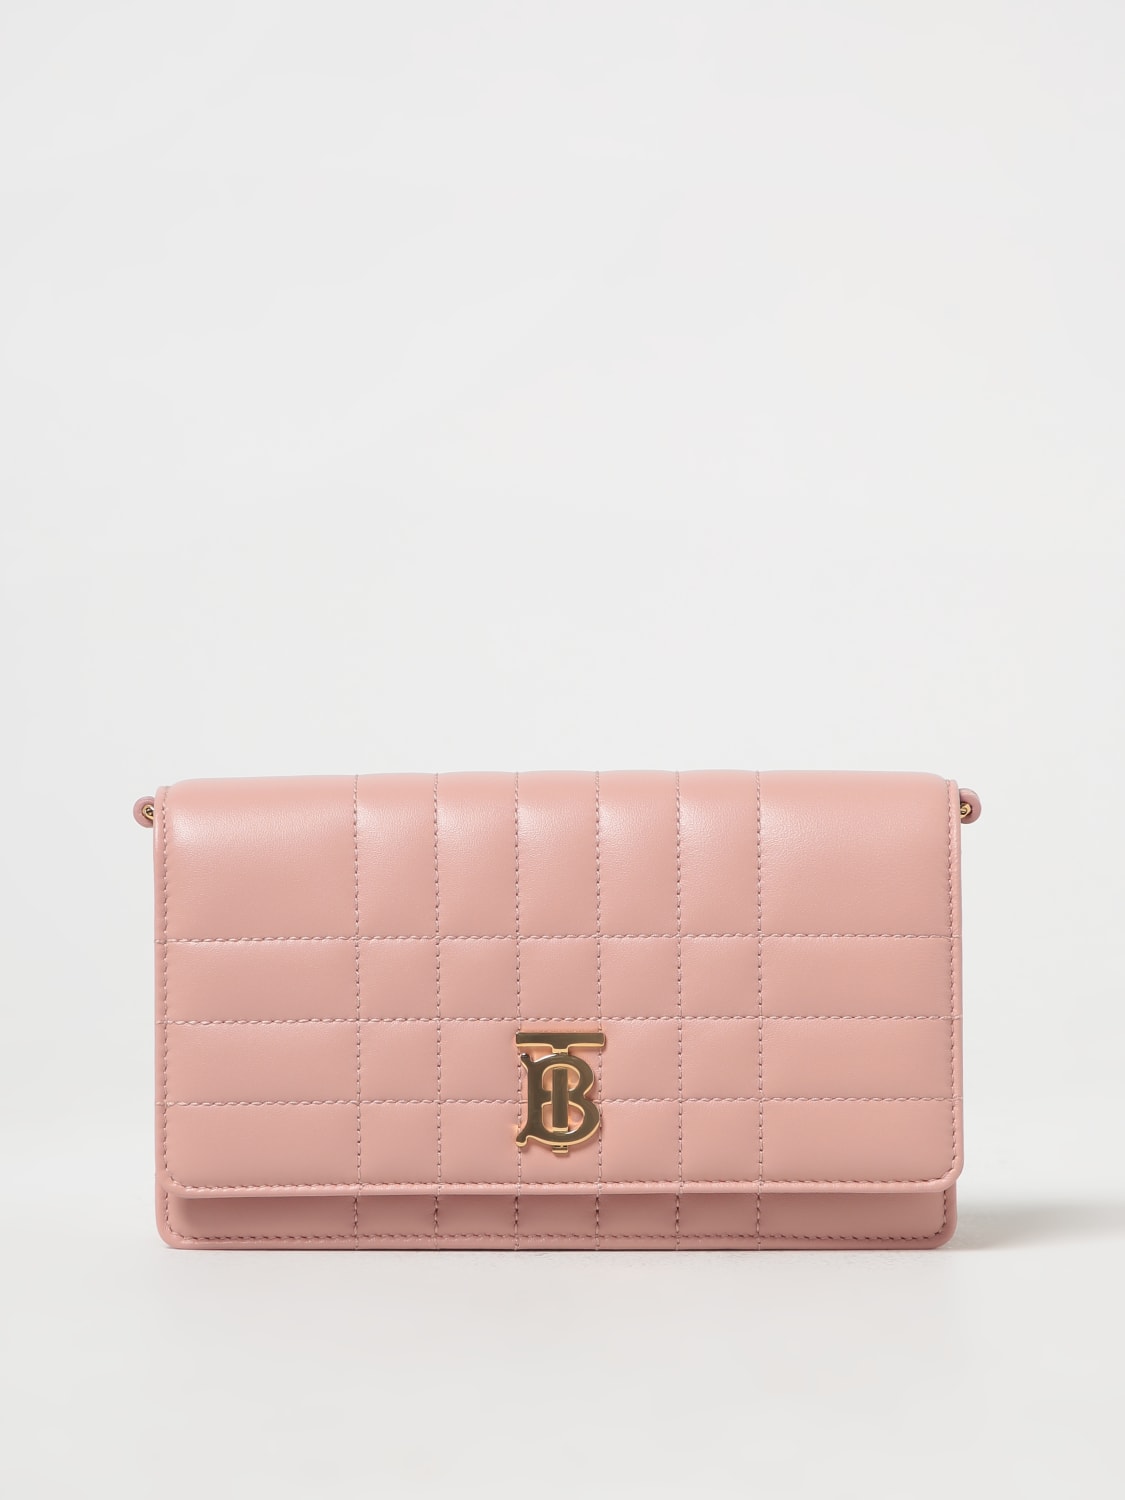 Burberry quilted leather lola mini bag